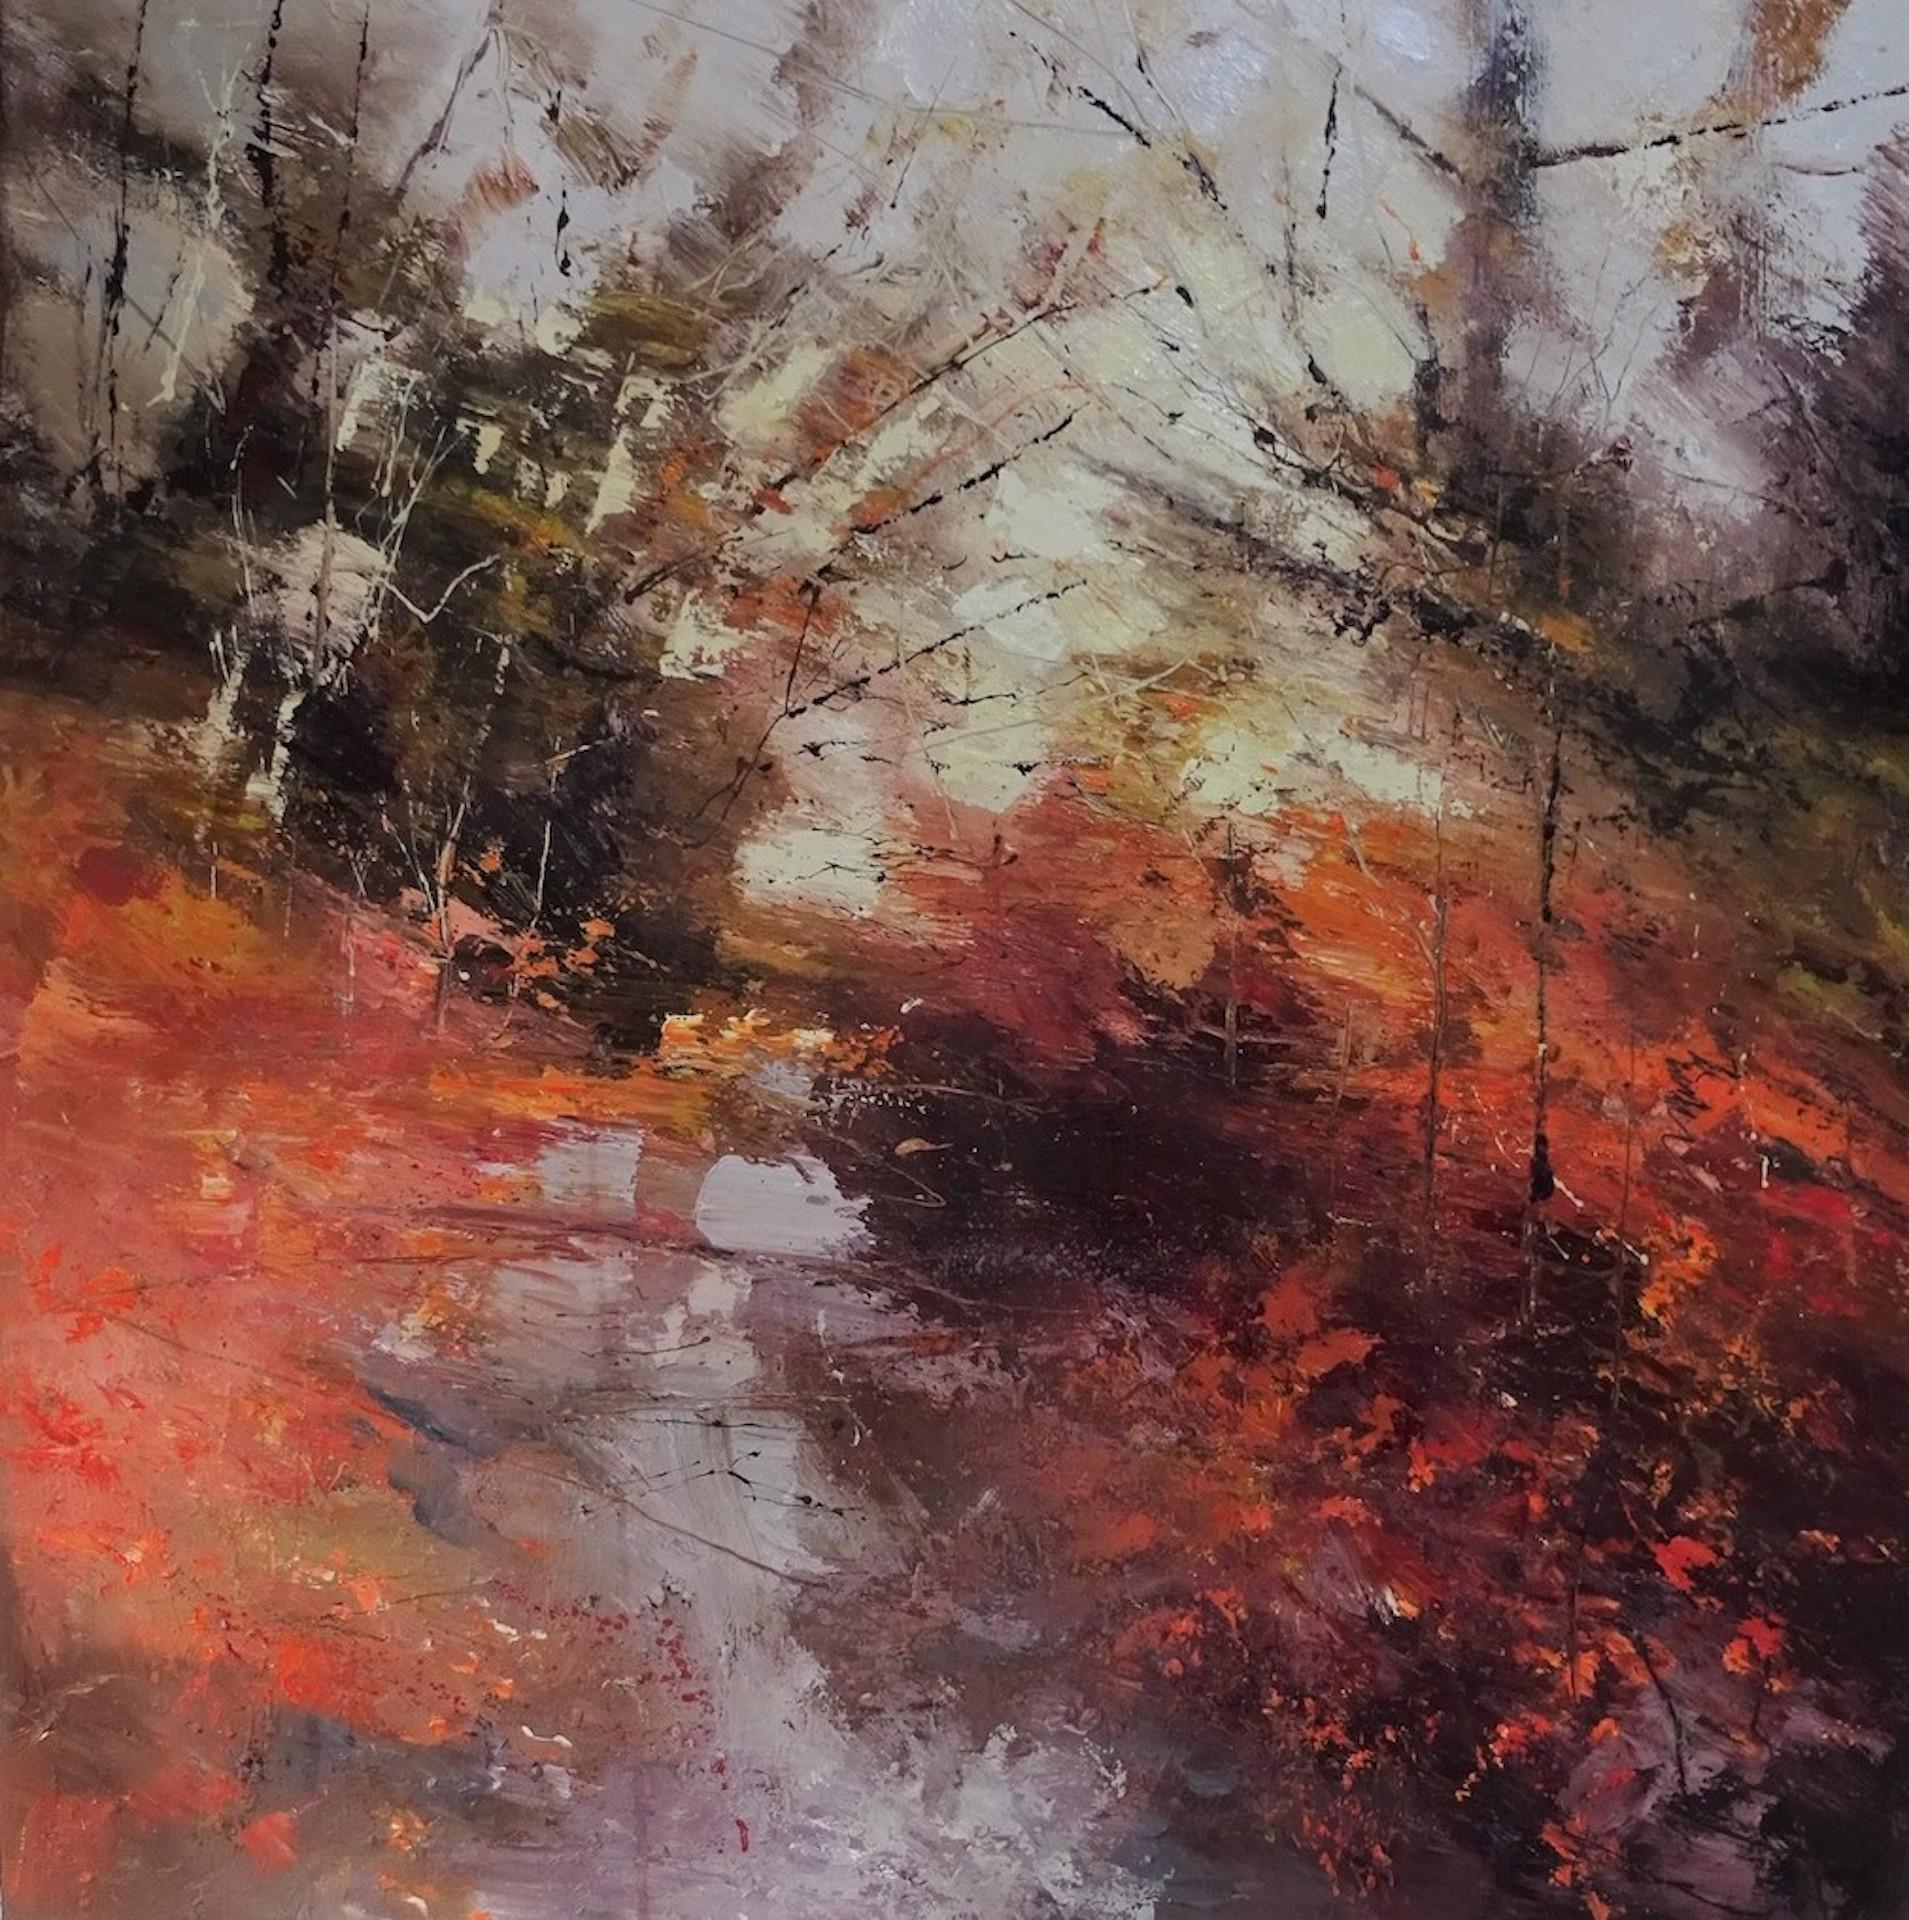 Claire Wiltsher
Sunrise Reception
Original Oil Painting
Oil Paint on Canvas
Canvas Size: H 90cm x W 90cm x D 4cm
Sold Unframed
Please note that in situ images are purely an indication of how a piece may look.

Sunrise Reception is an original